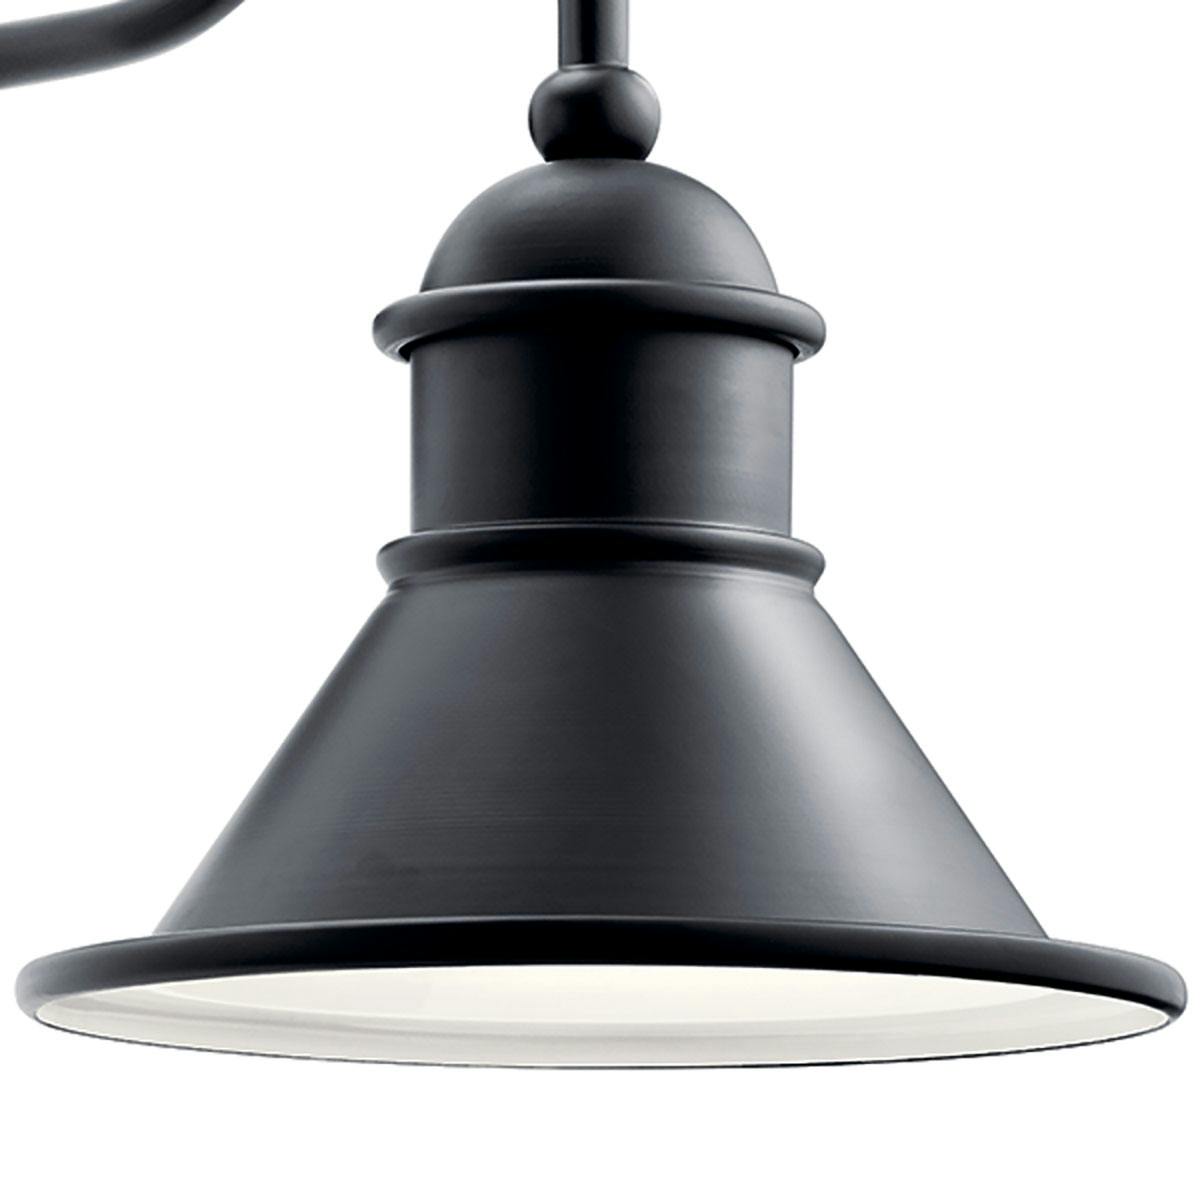 Close up view of the Northland 12" 1 Light Wall Light Black on a white background